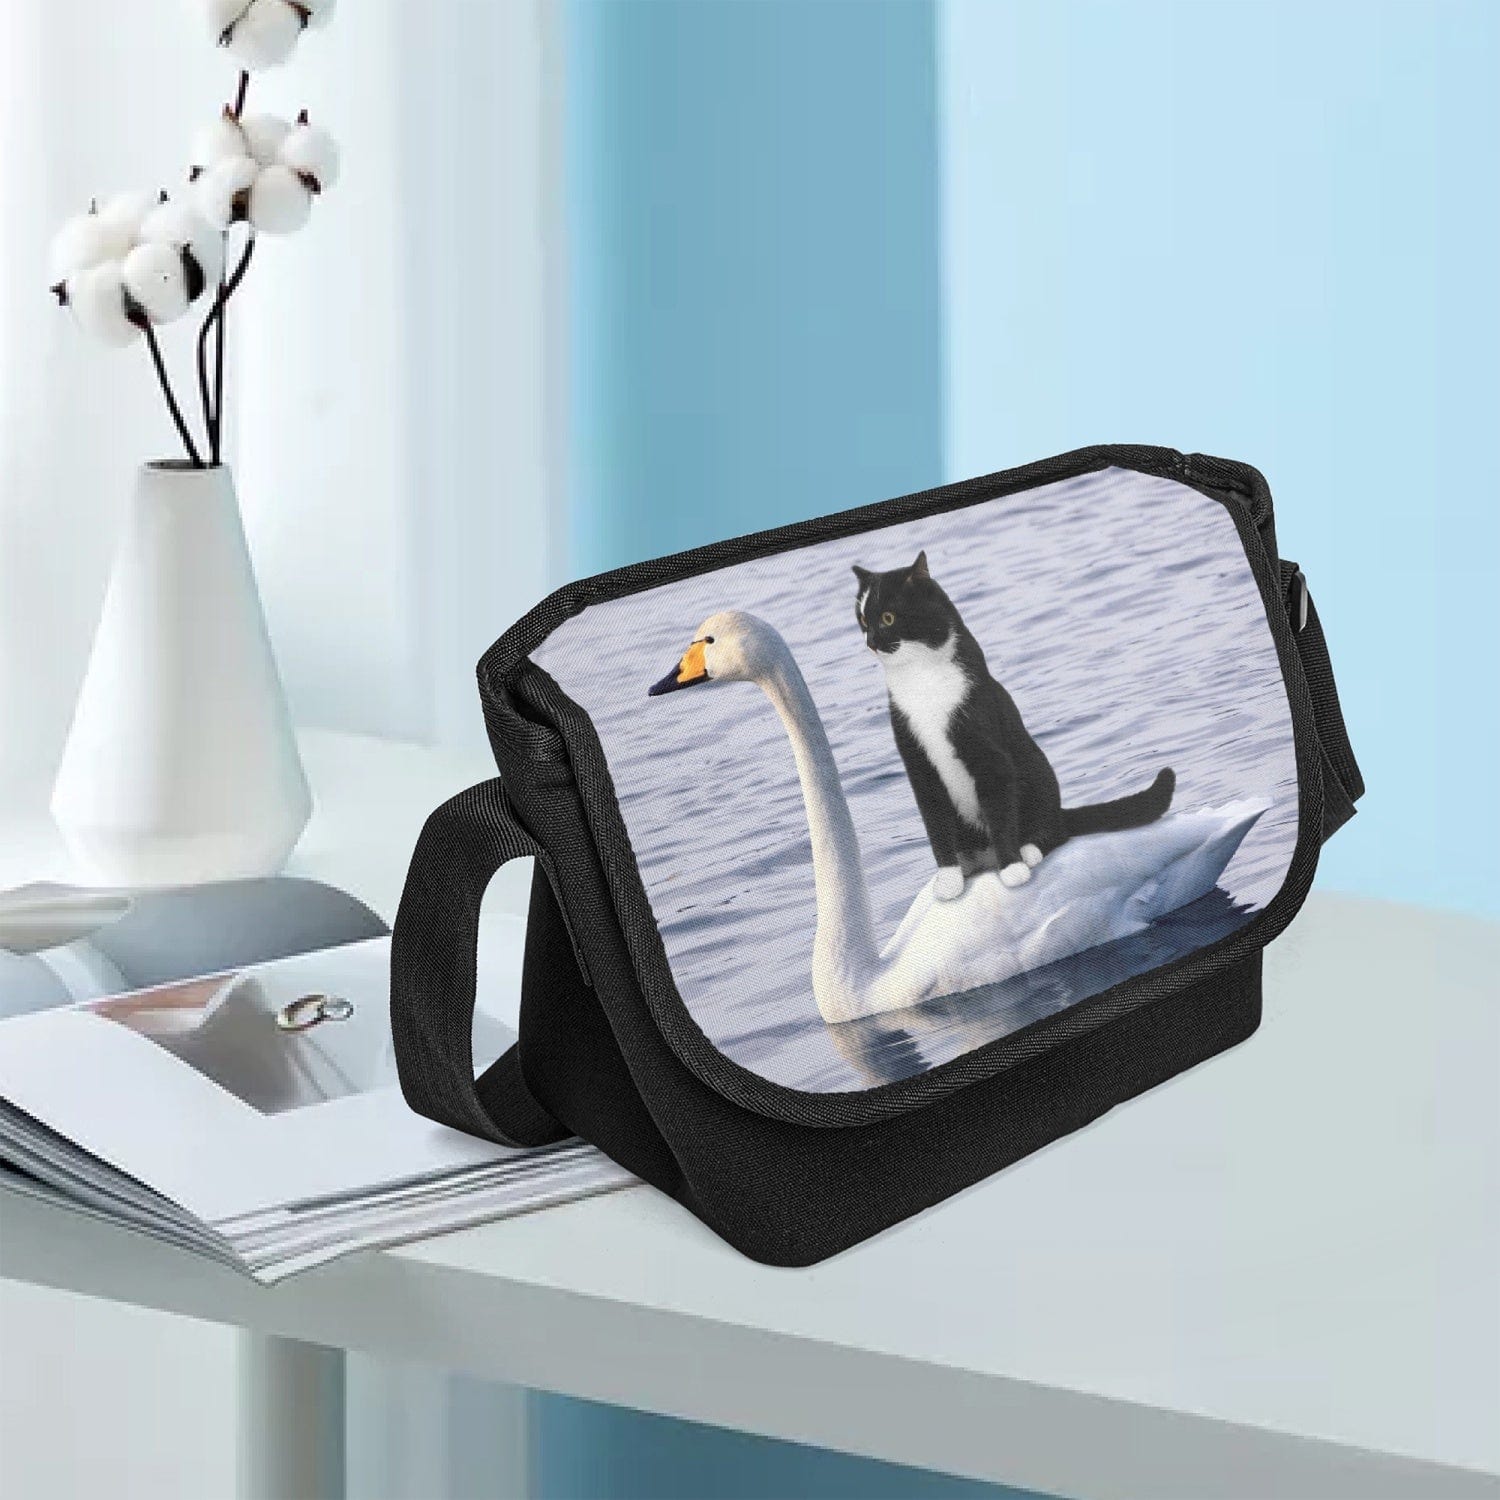 a tuxedo kitten rides on a white swan across a pond, a photographic print on a black canvas messenger bag sitting in a phd's office